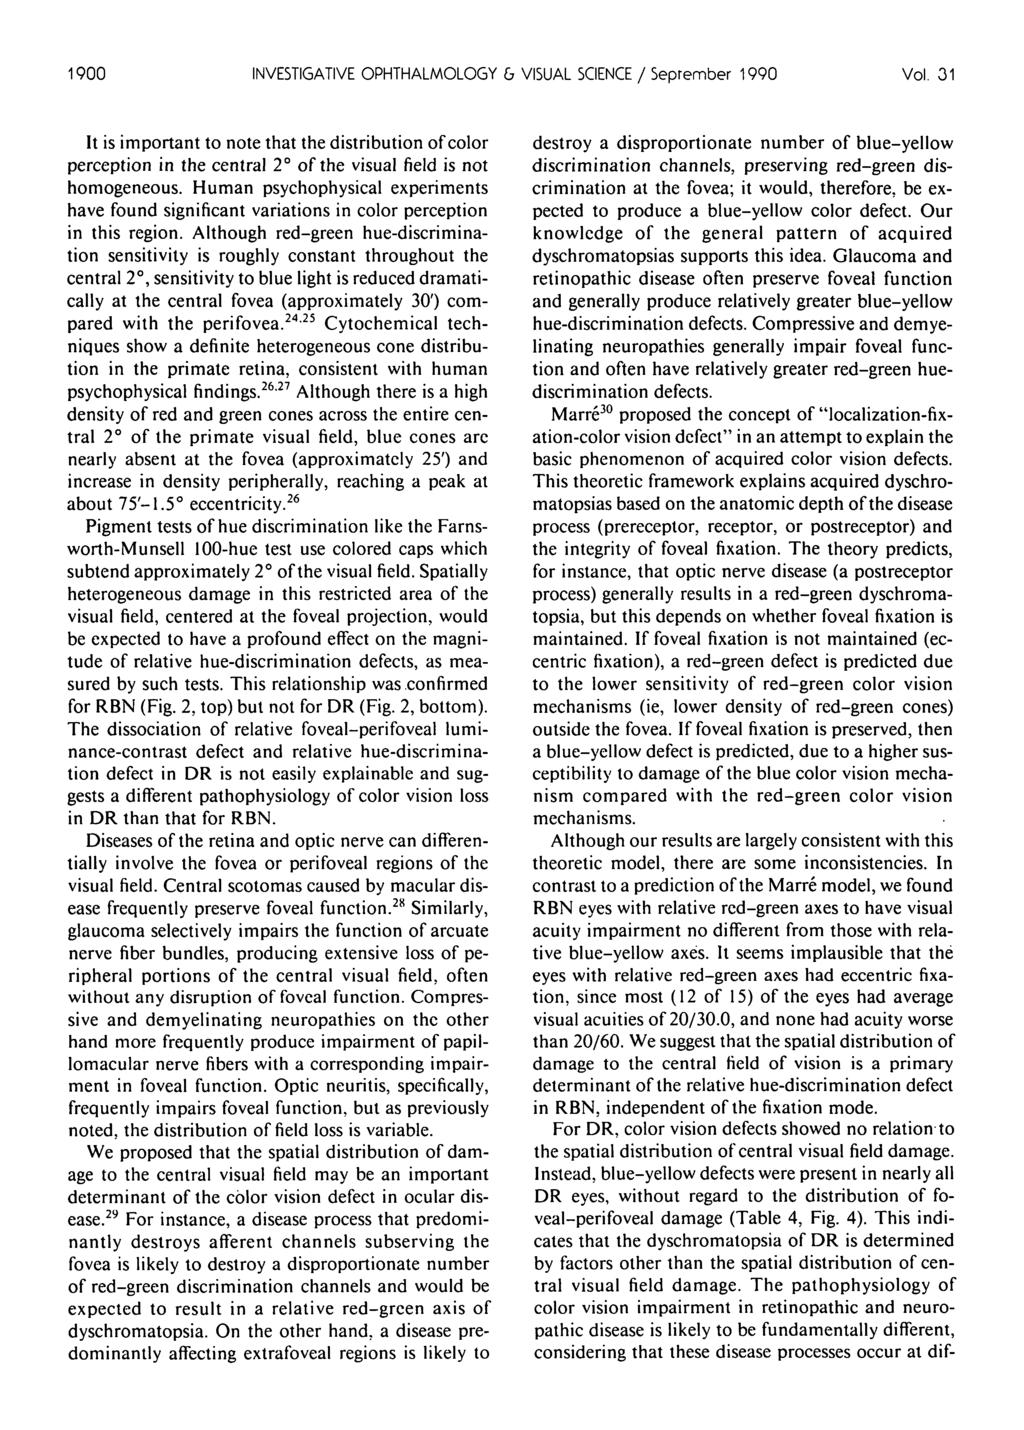 1900 INVESTIGATIVE OPHTHALMOLOGY & VISUAL SCIENCE / Seprember 1990 Vol. 31 It is important to note that the distribution of color perception in the central 2 of the visual field is not homogeneous.